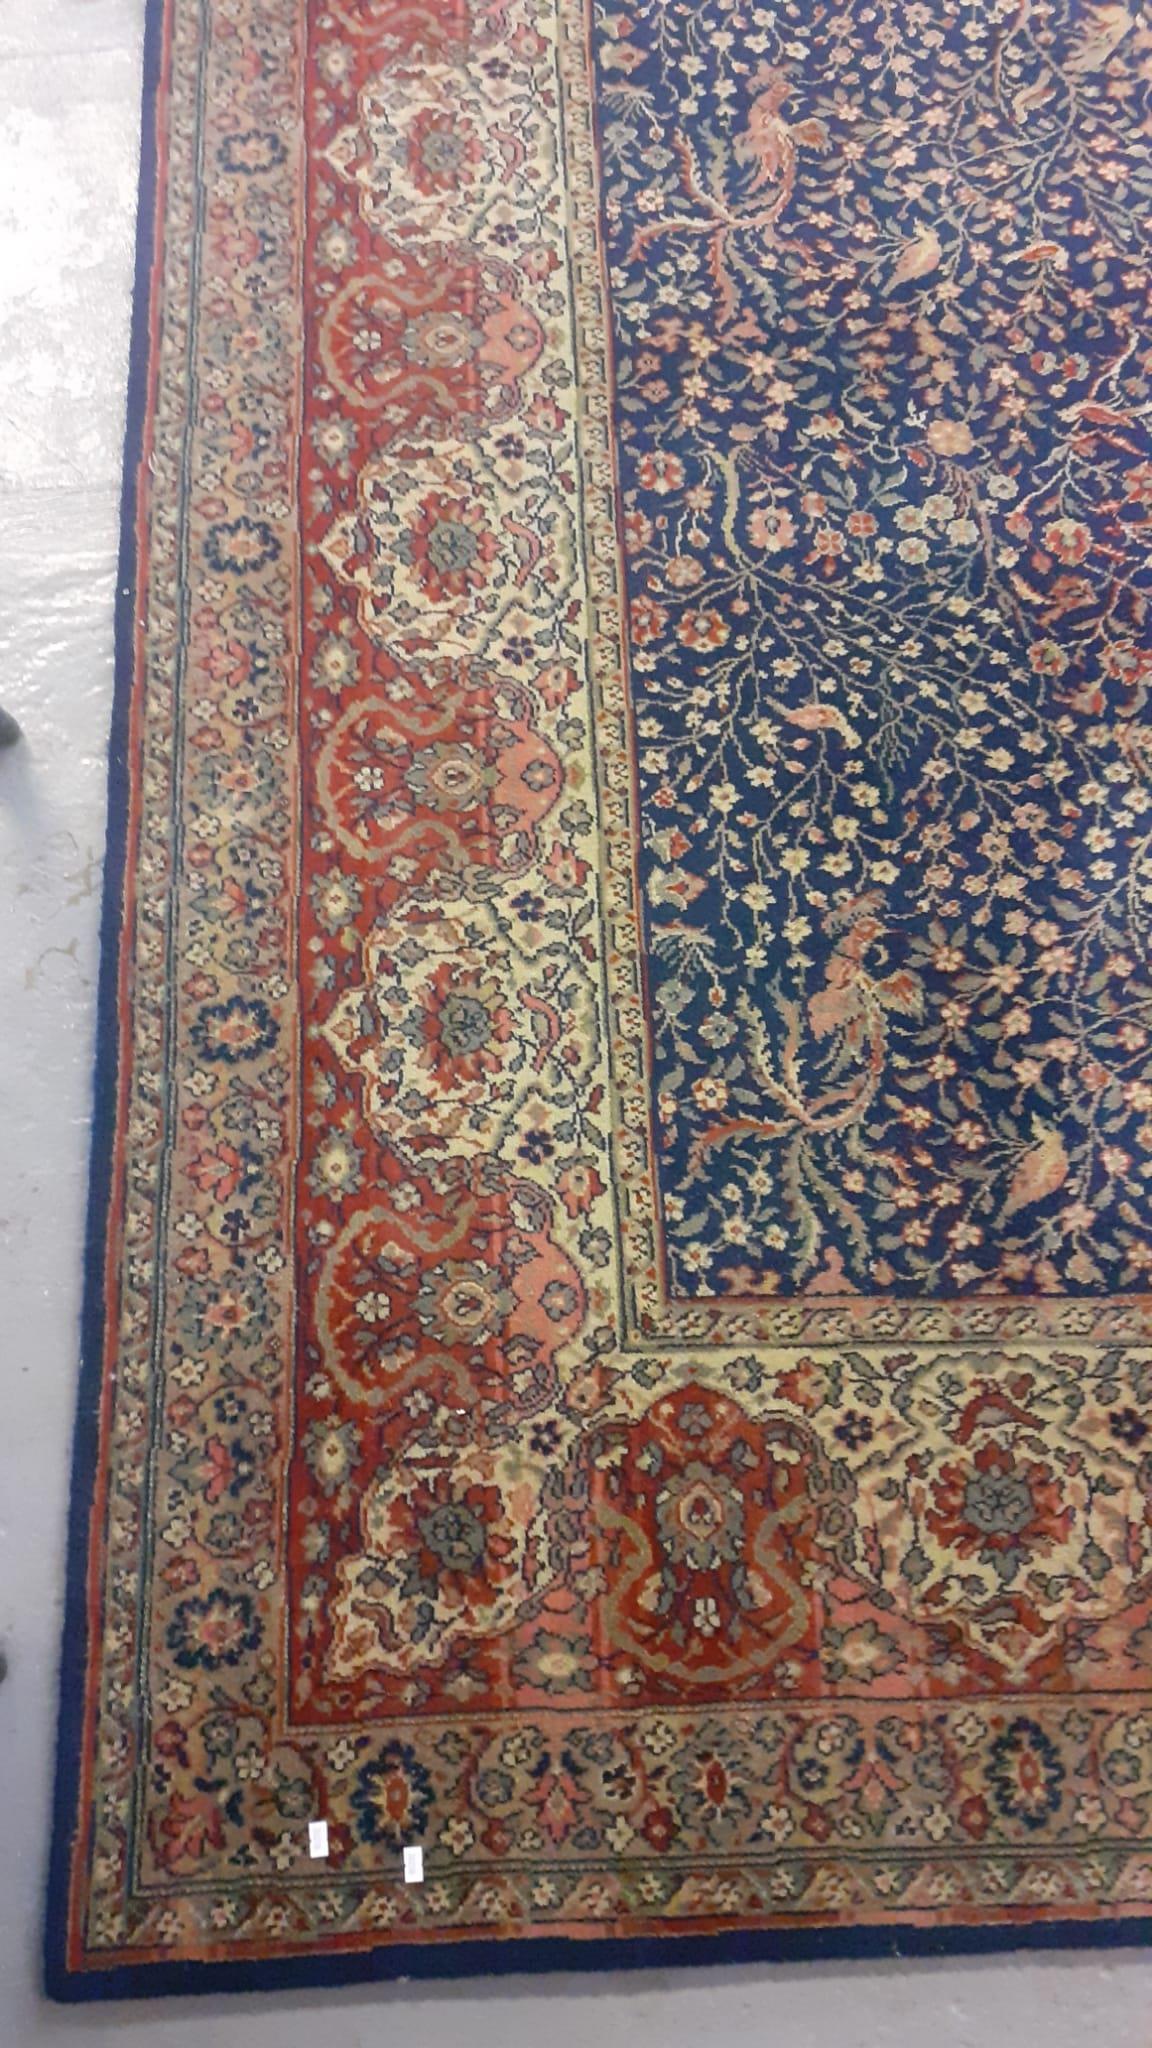 Large Persian style Axminster type carpet with dark blue field, birds, animals and foliage. - Image 2 of 2